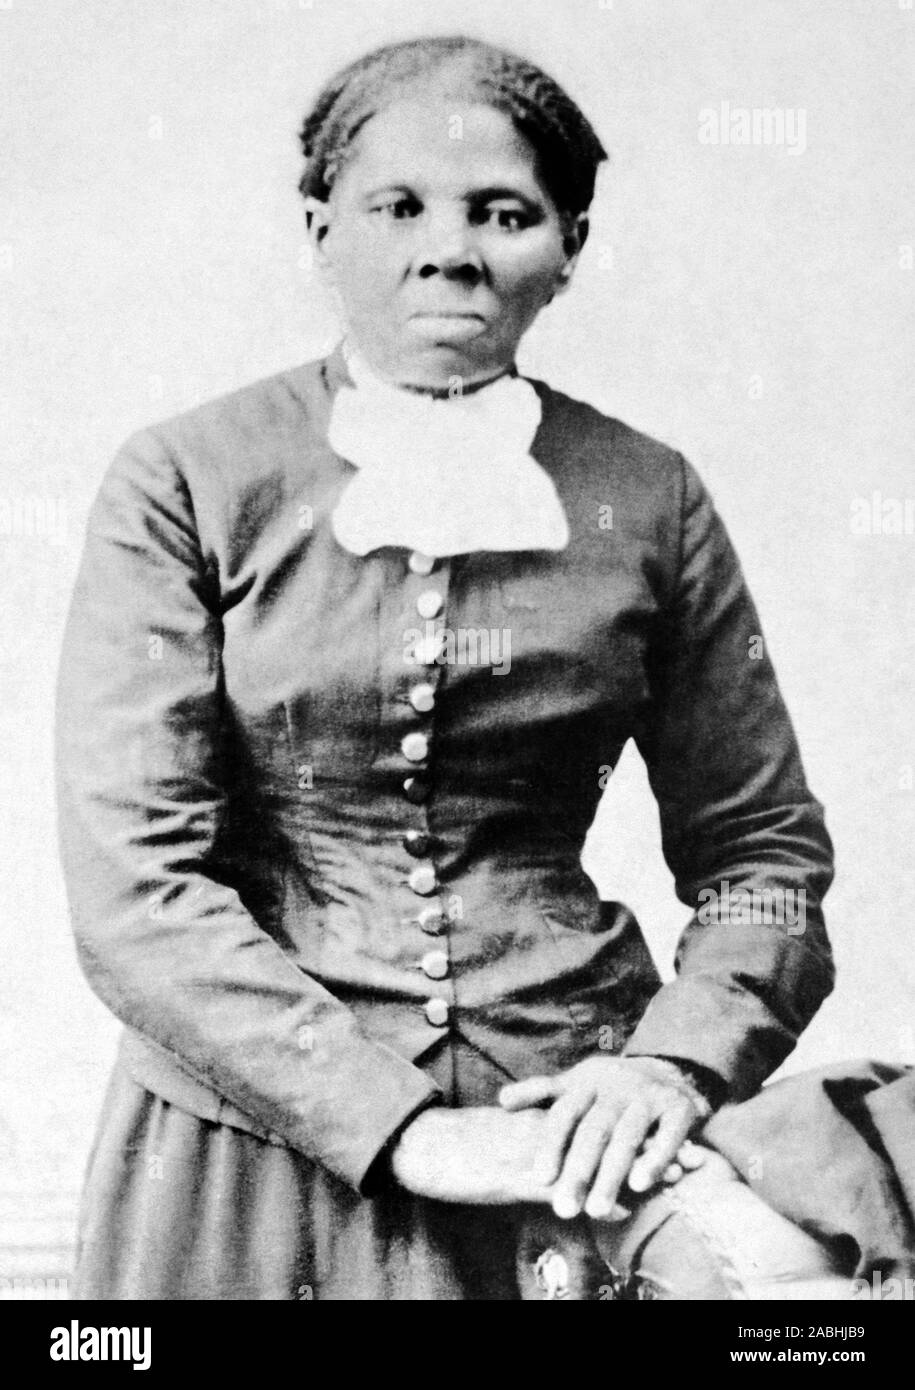 Vintage portrait photo of Harriet Tubman (c1820 – 1913). Born into slavery, Tubman (birth name Araminta Ross) escaped and later guided other slaves to freedom via the Underground Railroad before working as a nurse, spy and scout for the Union Army during the American Civil War. In later life she engaged in humanitarian work and promoted the cause of women’s suffrage. Photo circa 1875 by Harvey B Lindsley. Stock Photo